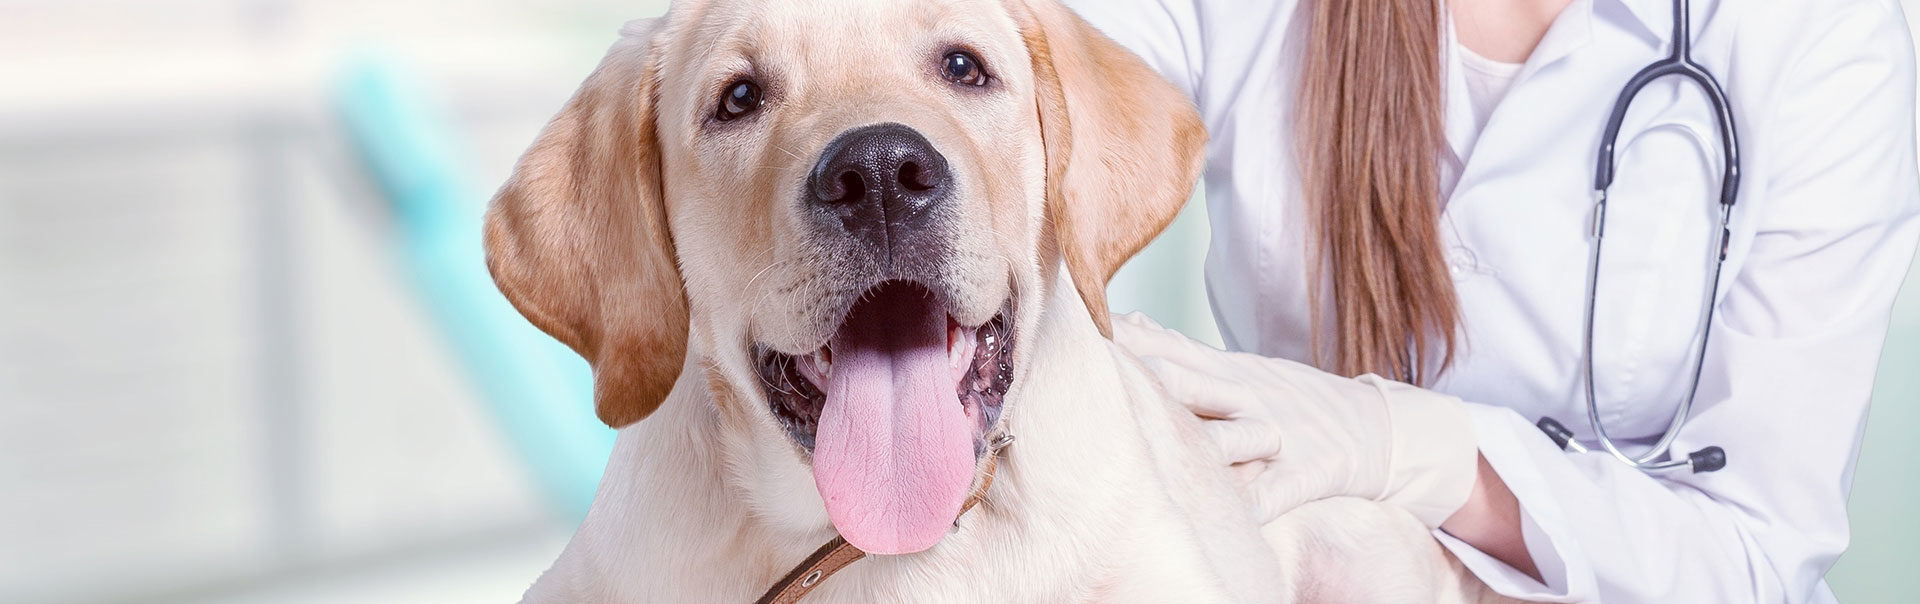 Lying dog sticking its tongue out and a veterinarian sitting behind